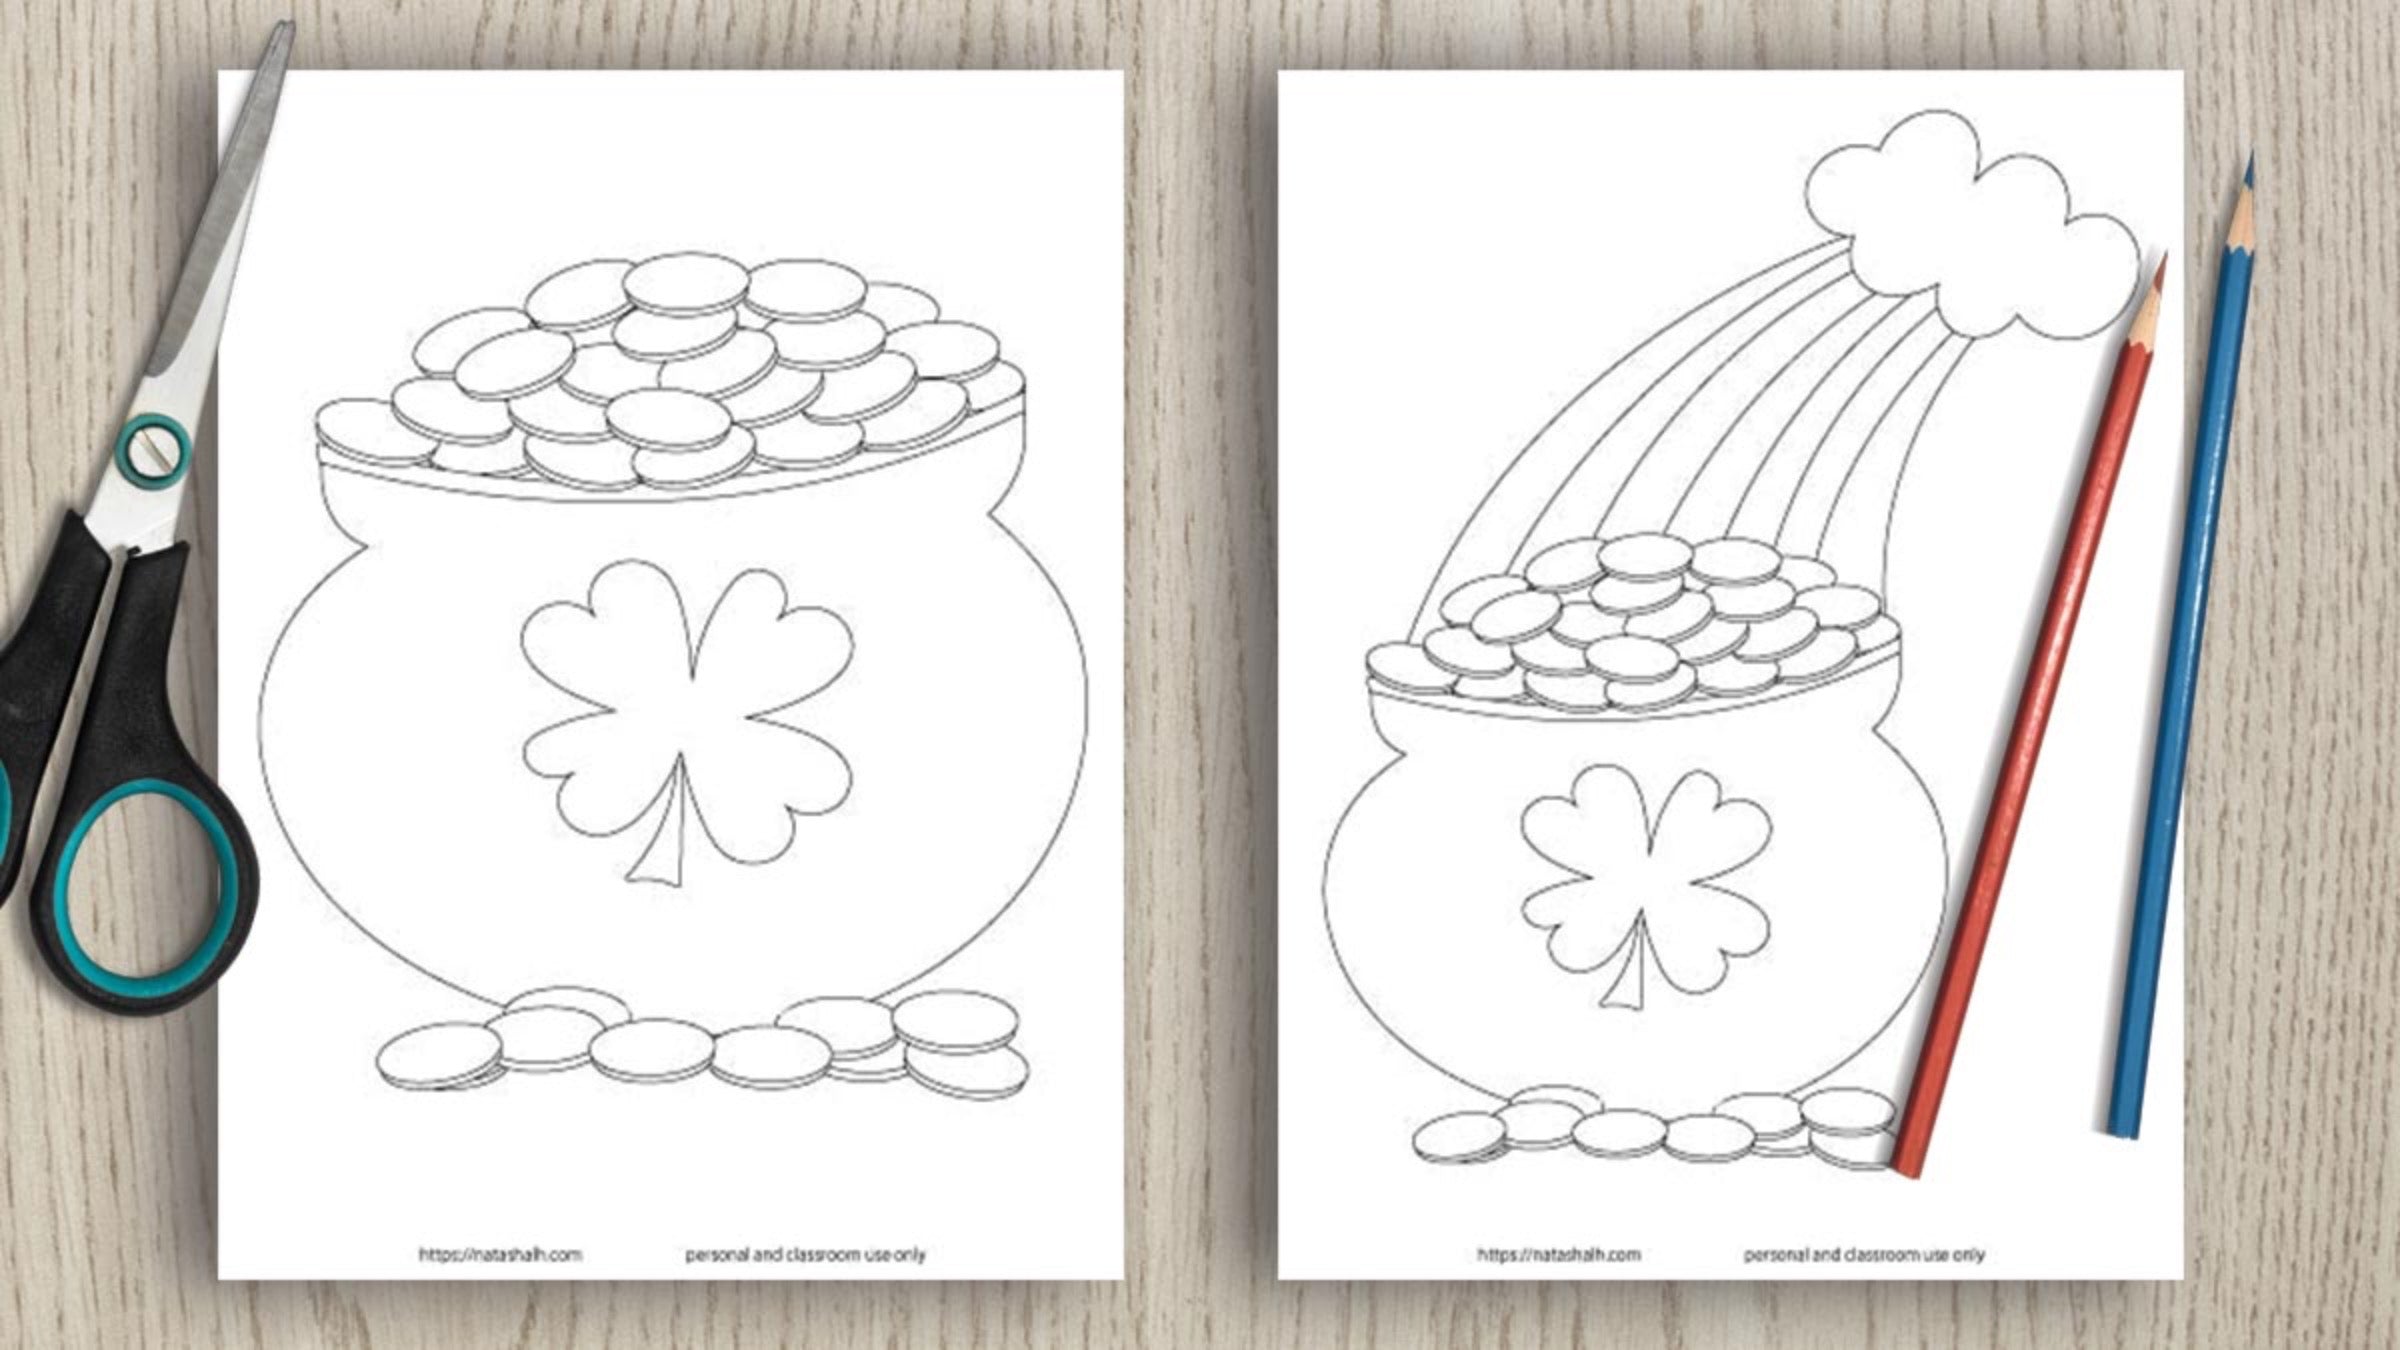 Pot O' Gold  Printable Clip Art and Images